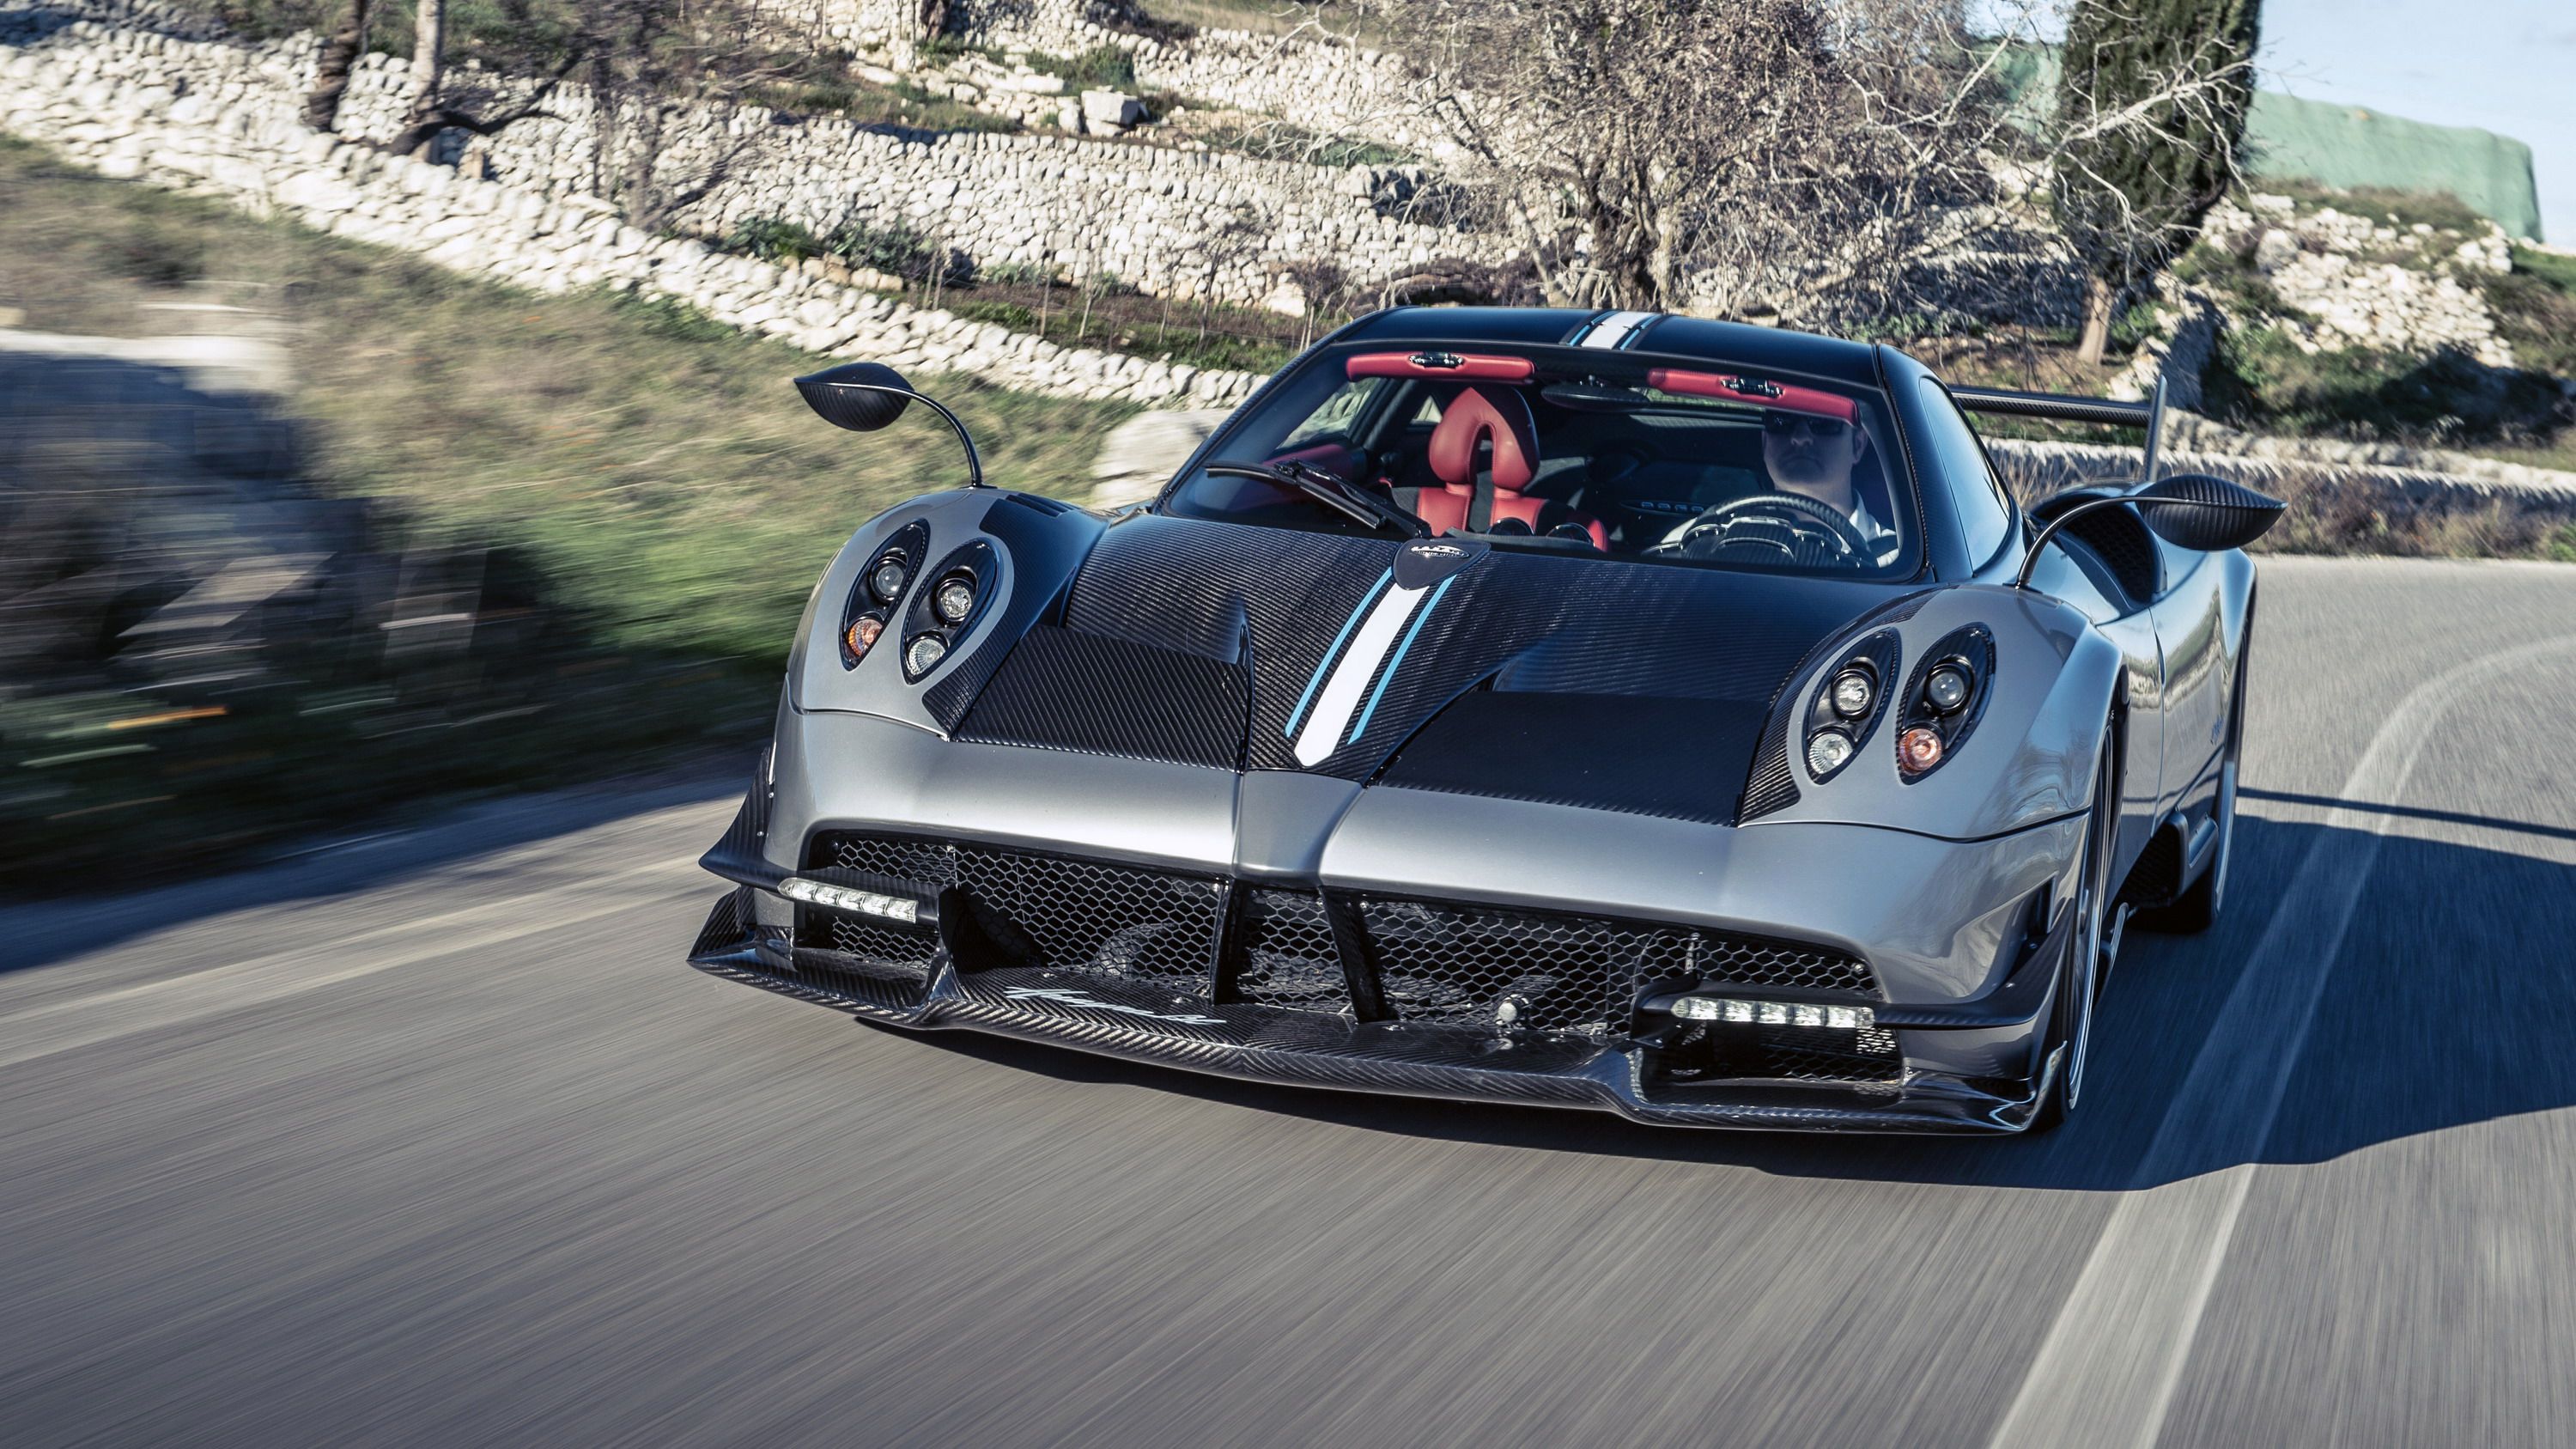 2021 The Pagani Huayra’s Successor Promises a Next-Gen V-12 and a Manual Transmission